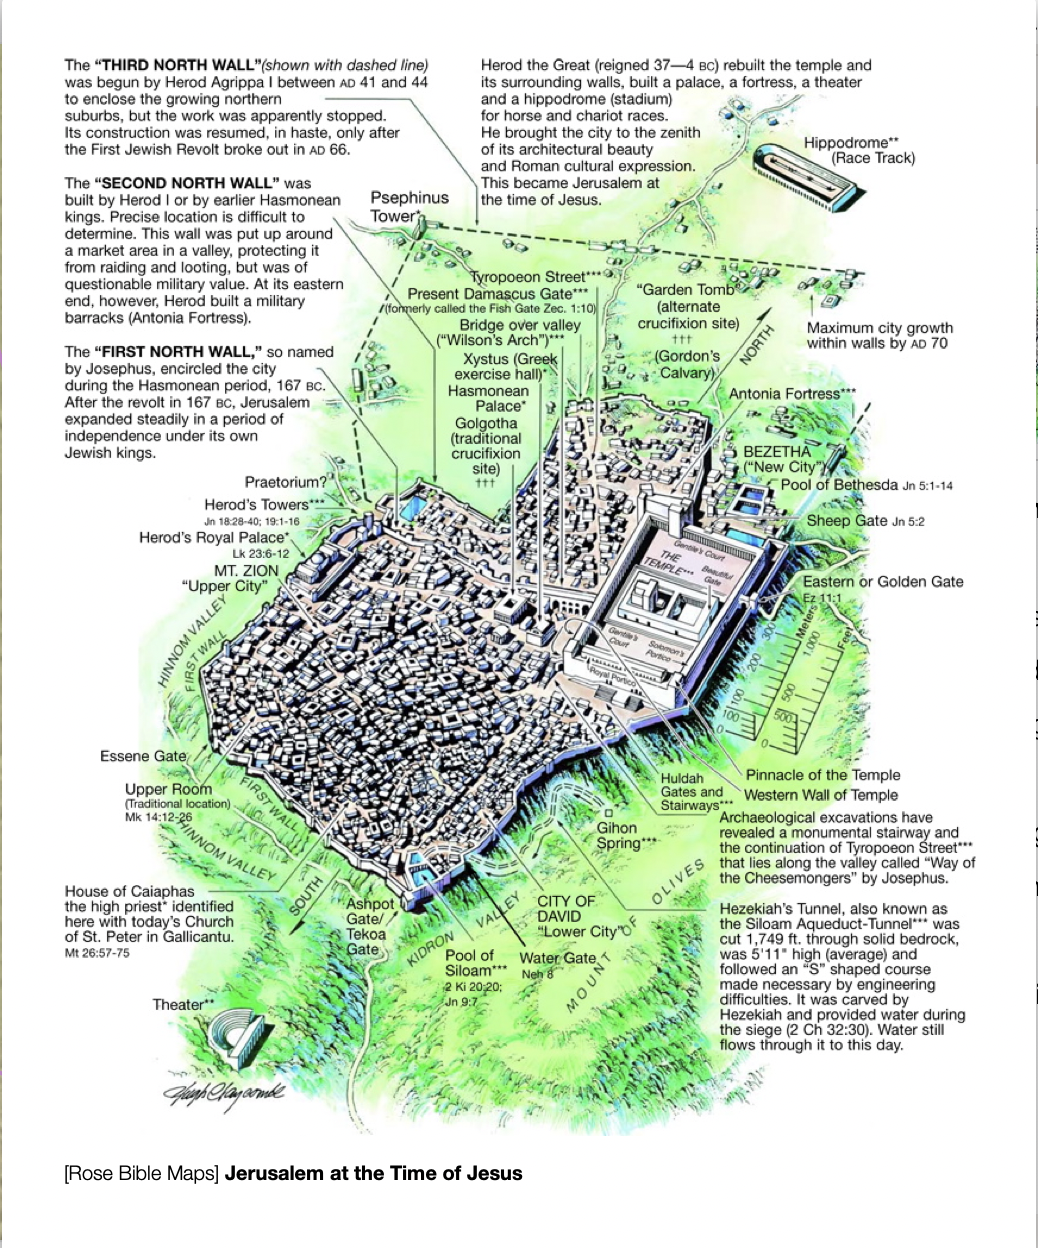 A 3D Map of Jerusalem at the time of Jesus with locations of events during his trips to Jerusalem.